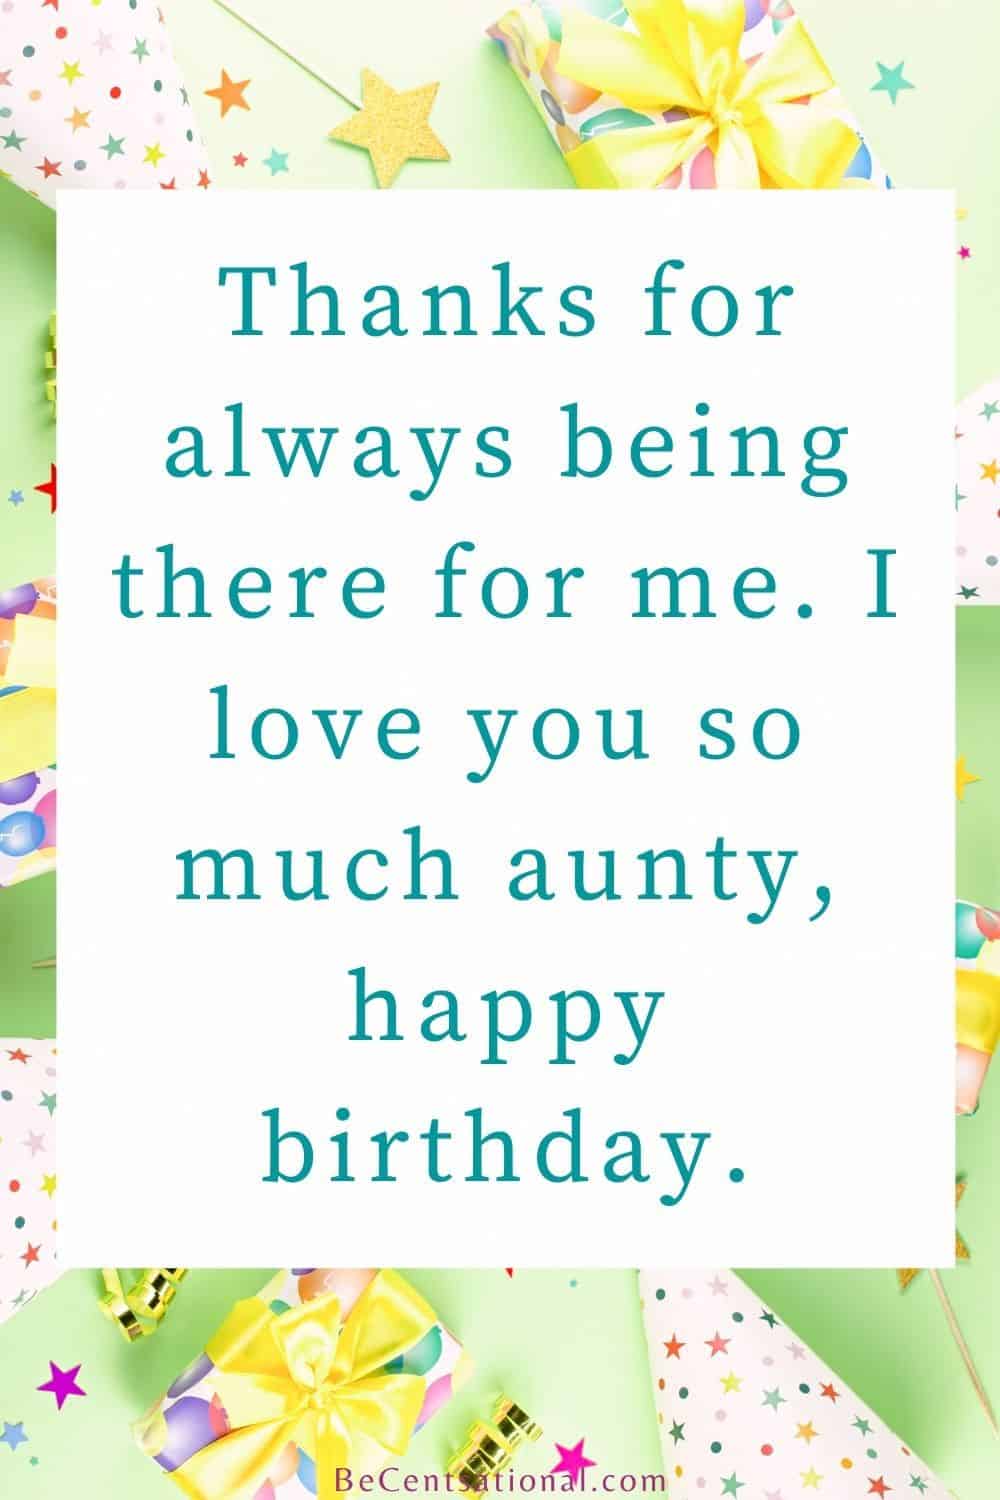 50 Heart Touching Birthday Wishes for Aunt - BeCentsational